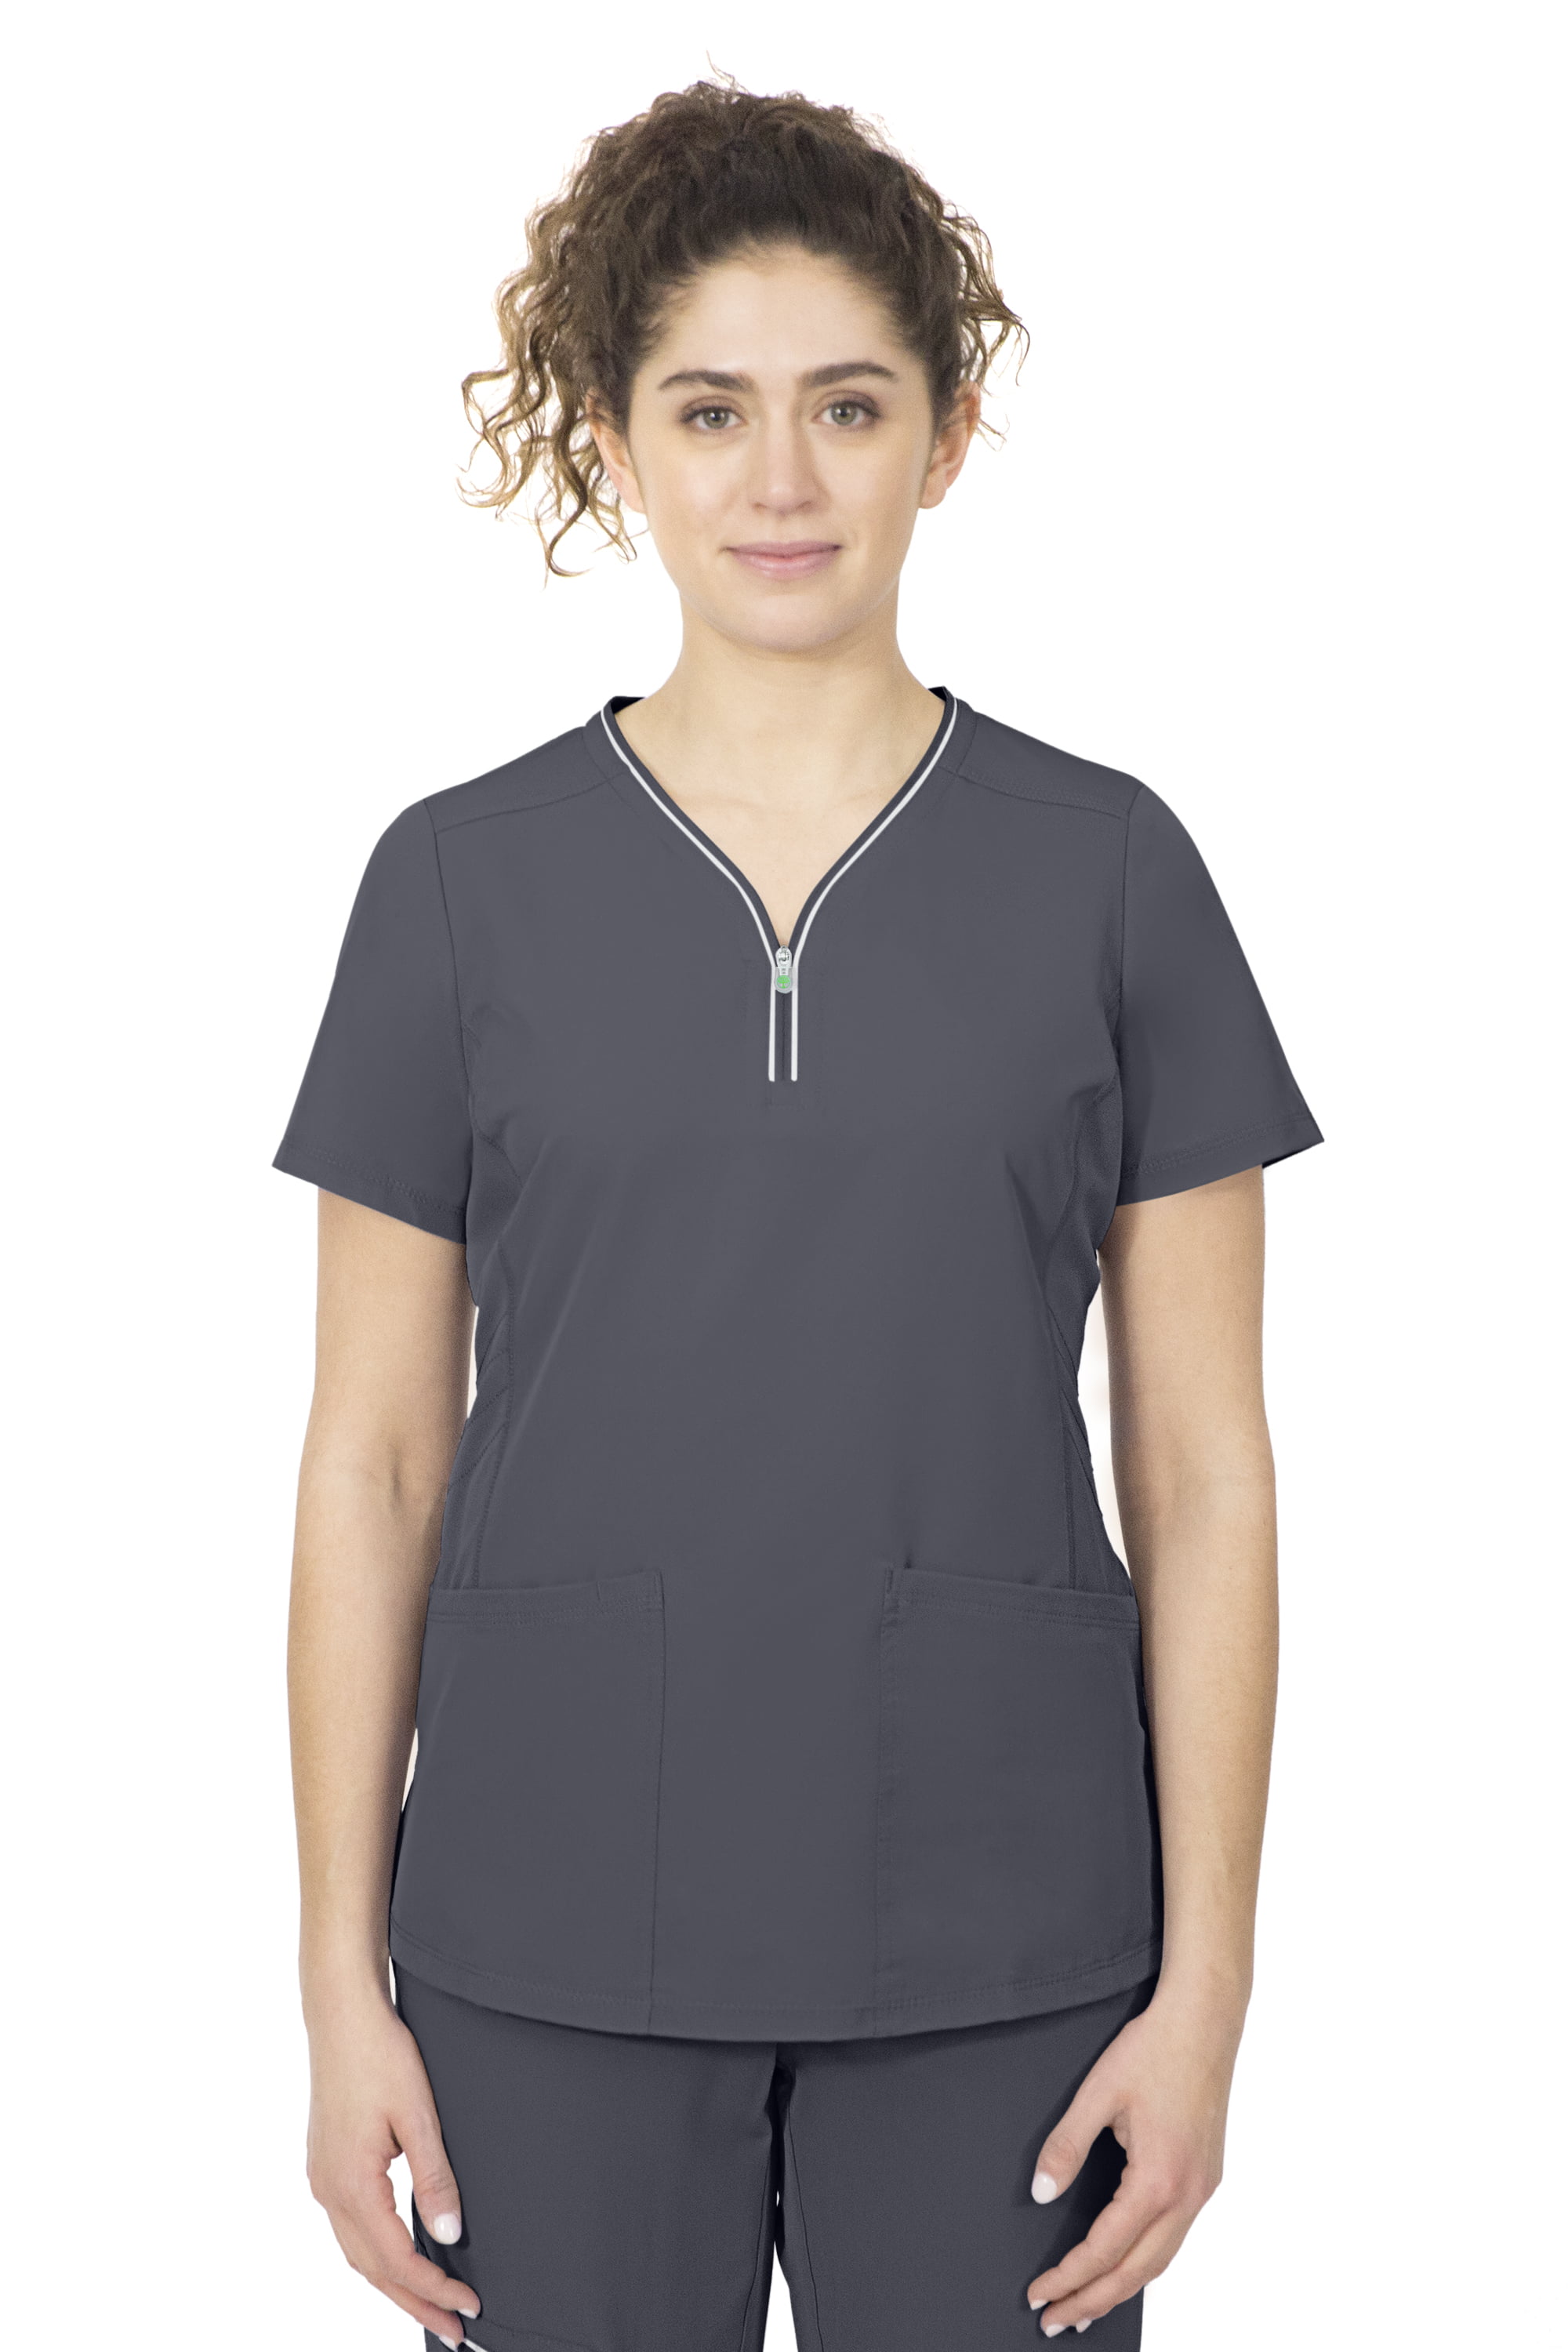 healing hands Scrubs top for Women 3 Pocket Zipper Y-Neck Women's Scrub Top  Light Breathable Stretch Fabric 2254 Sonia HH360 Royal XS 